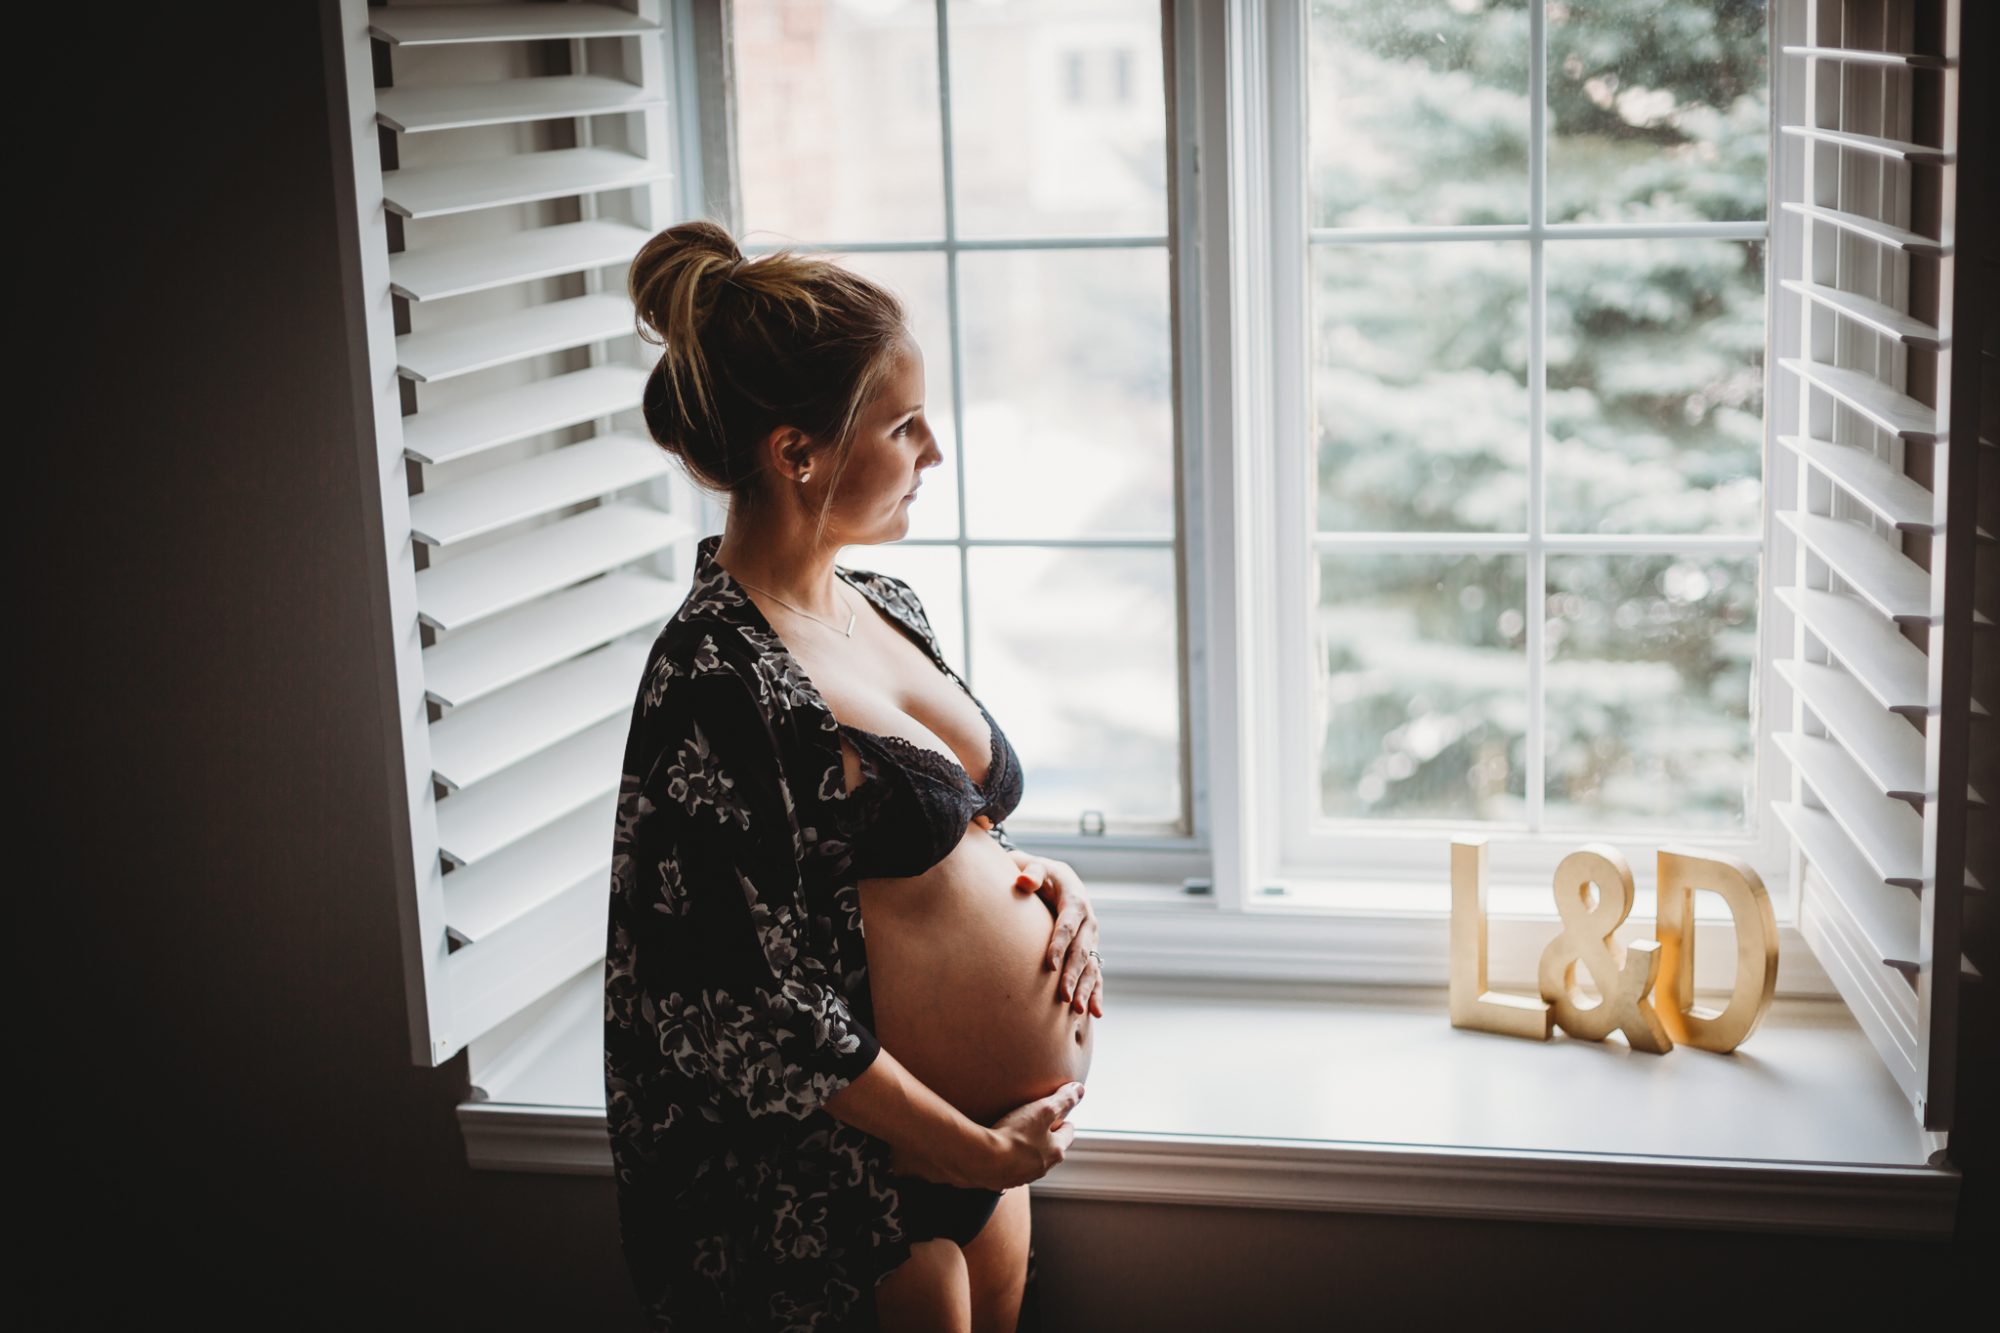 An open letter to my pregnant self.